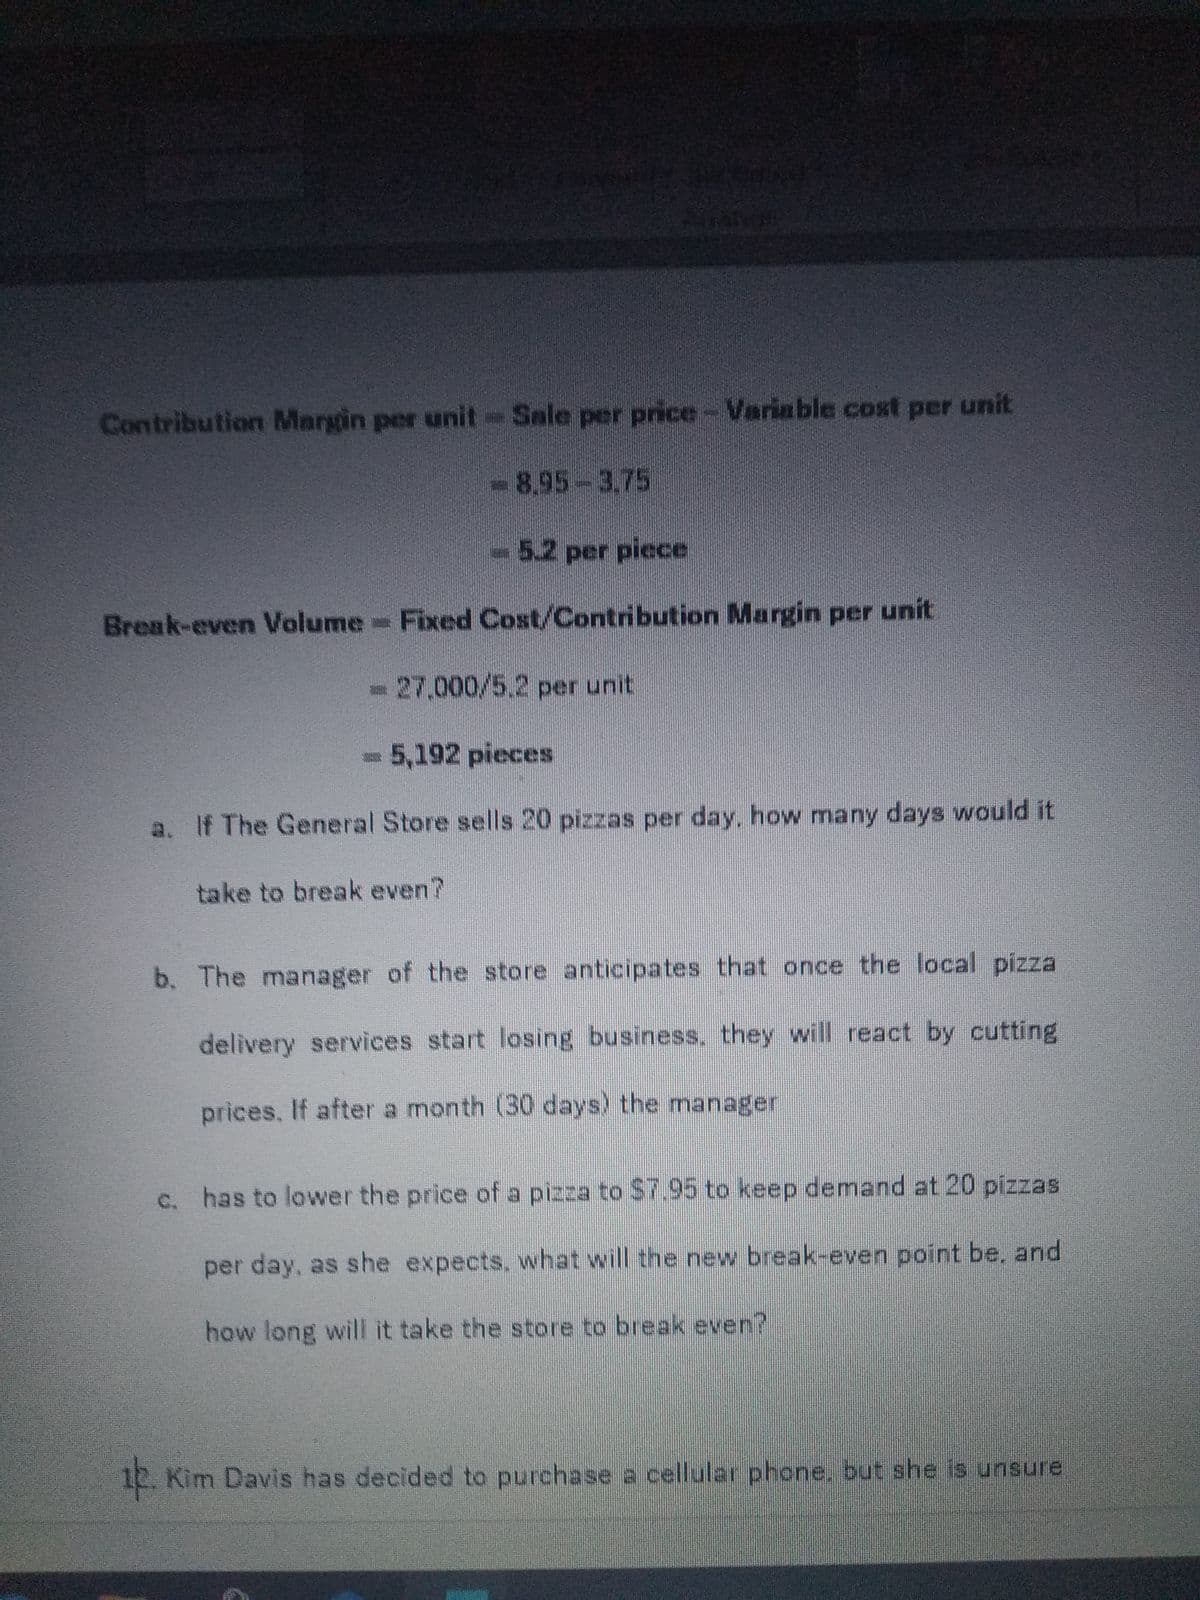 Contribution Margin per unit-Sale per price- Variable cost per unit
-8,95-3,75
-5.2 per piece
Break-even Volume Fixed Cost/Contribution Margin per unit
27,000/5.2 per unit
5,192 pieces
a. If The General Store sells 20 pizzas per day, how many days would it
take to break even?
b. The manager of the store anticipates that once the local pizza
delivery services start losing business. they will react by cutting
prices, If after a month (30 days) the manager
c. has to lower the price of a pizza to $7.95 to keep demand at 20 pizzas
per day, as she expects, what will the new break-even point be, and
how long will it take the store to break even?
10. Kim Davis has decided to purchase a cellular phone. but she is unsure
